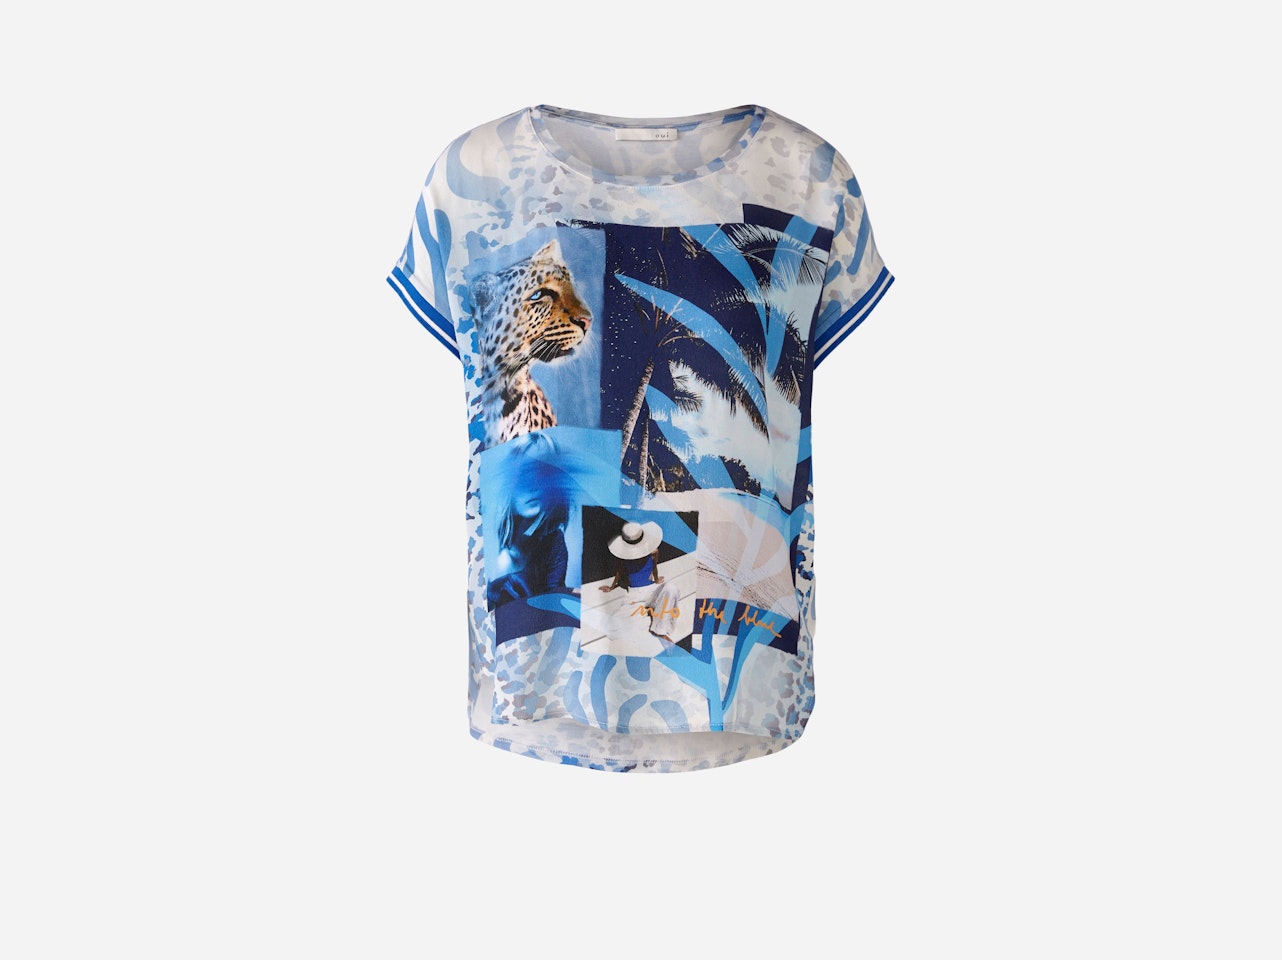 Bild 7 von Blouse shirt webpatch digitally printed with decoration in white blue | Oui